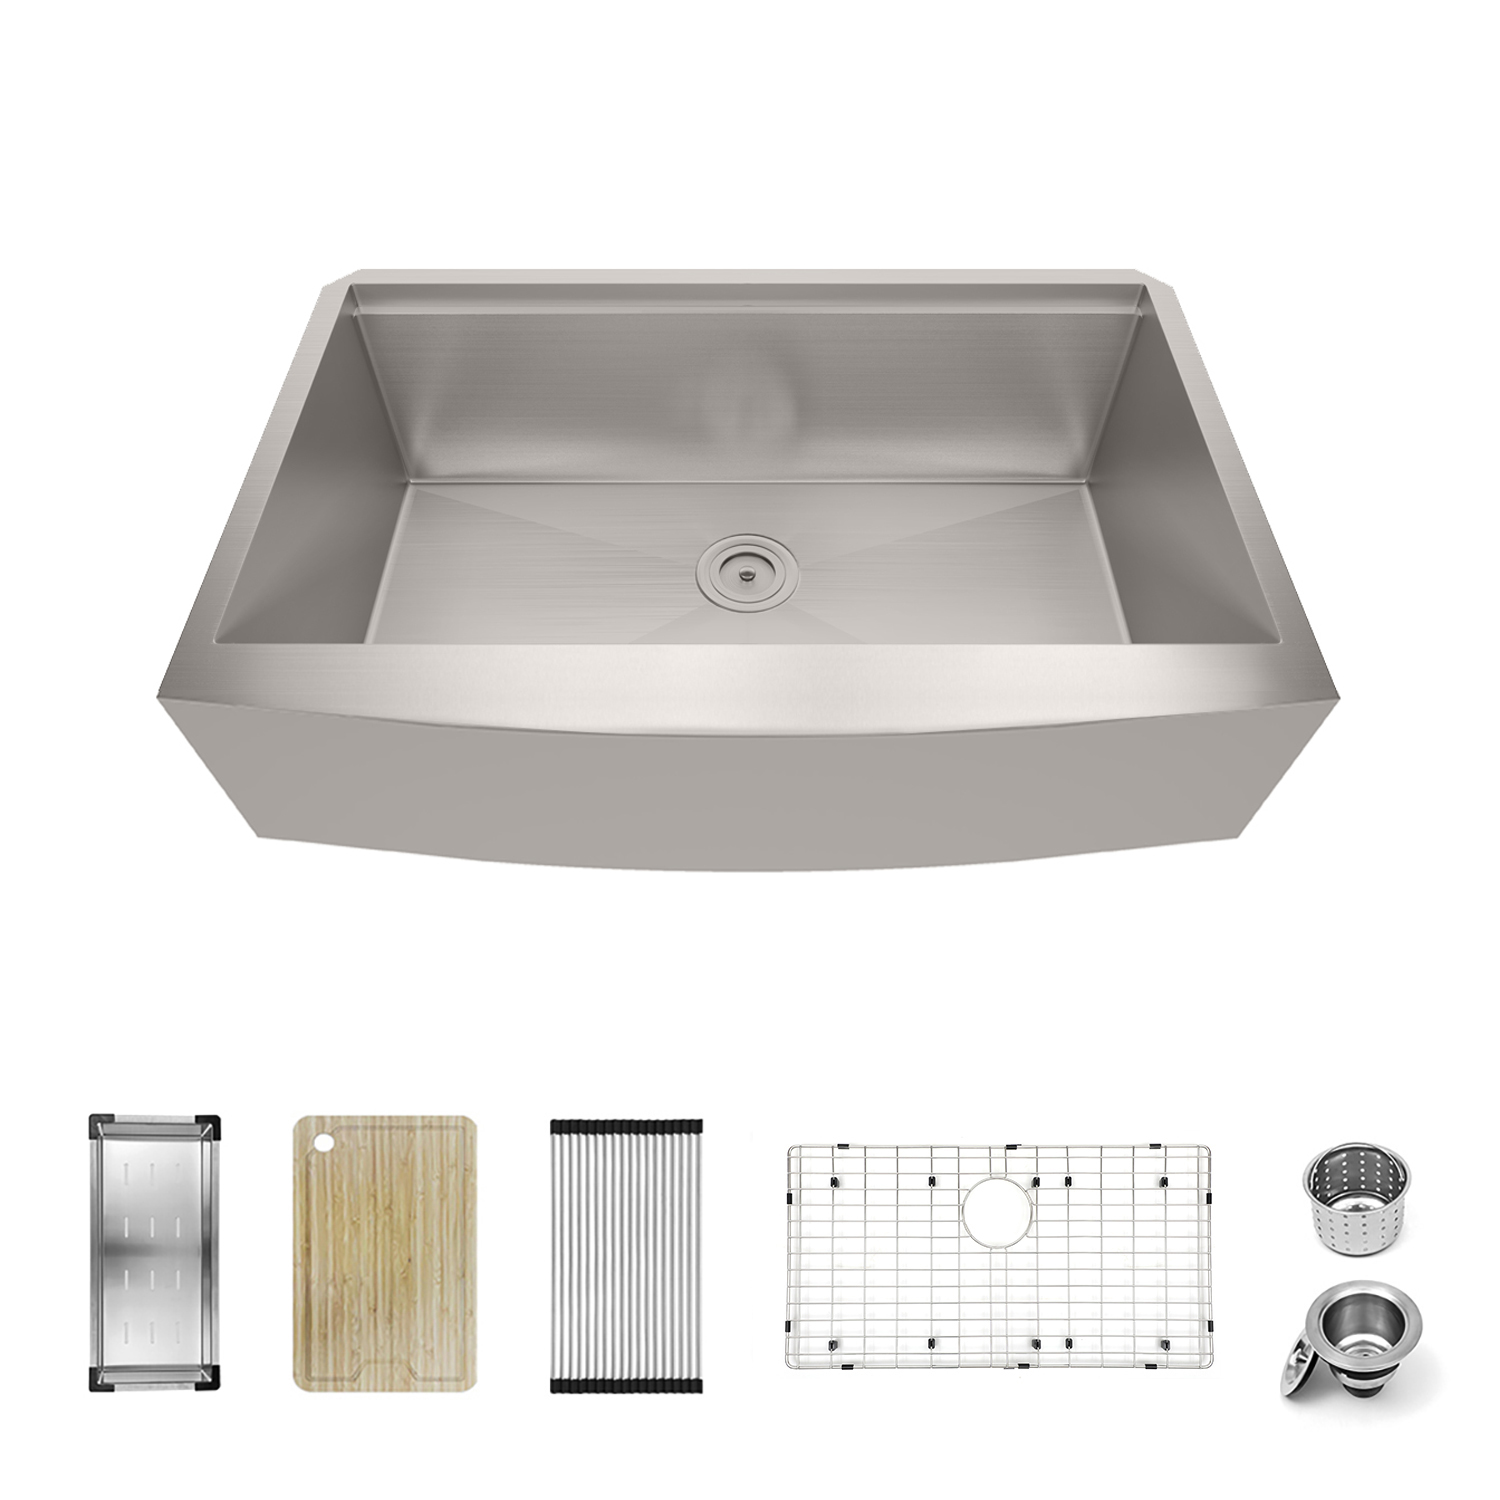 KSS0004S-OL 33" 16 Gauge Single Bowl 304 Stainless Steel Workstation Farmhouse Apron Kitchen Sink With Accessories